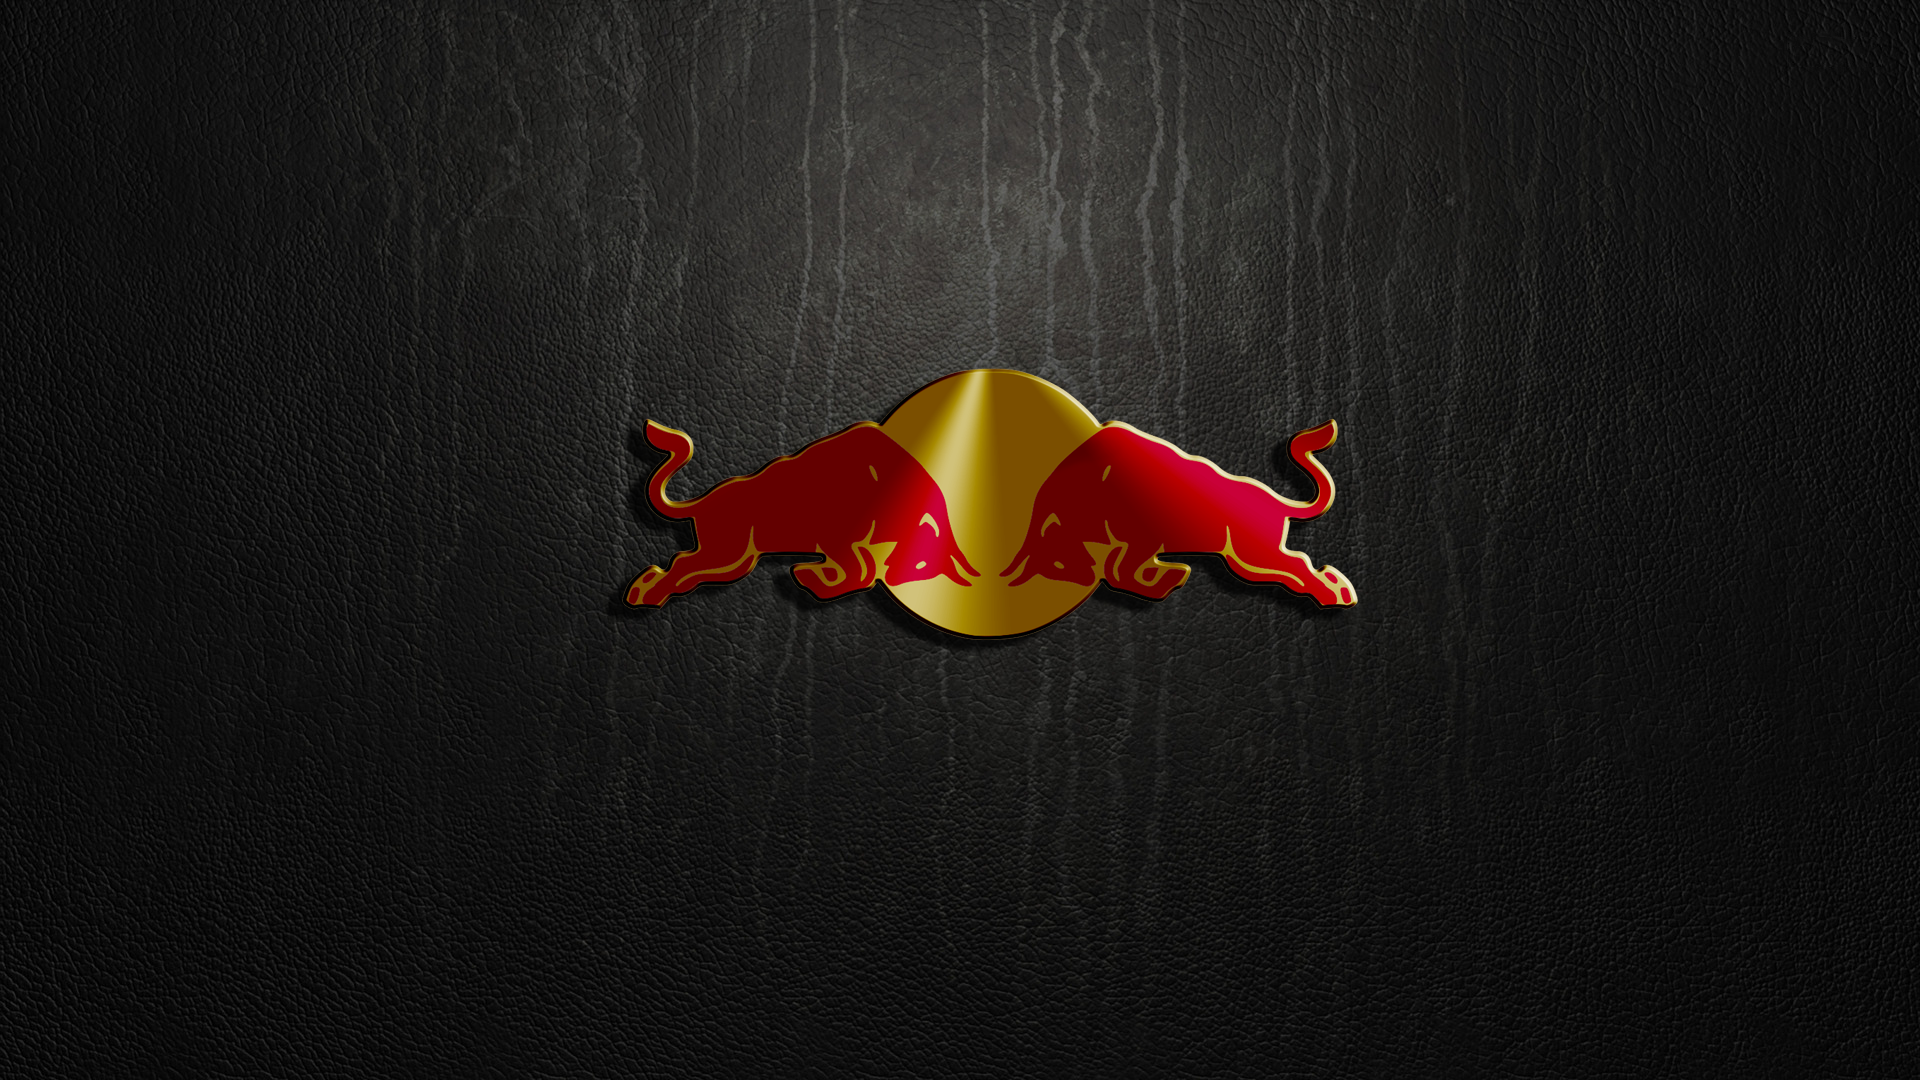 Red Bull Logo Leather Texture Q Wallpaper